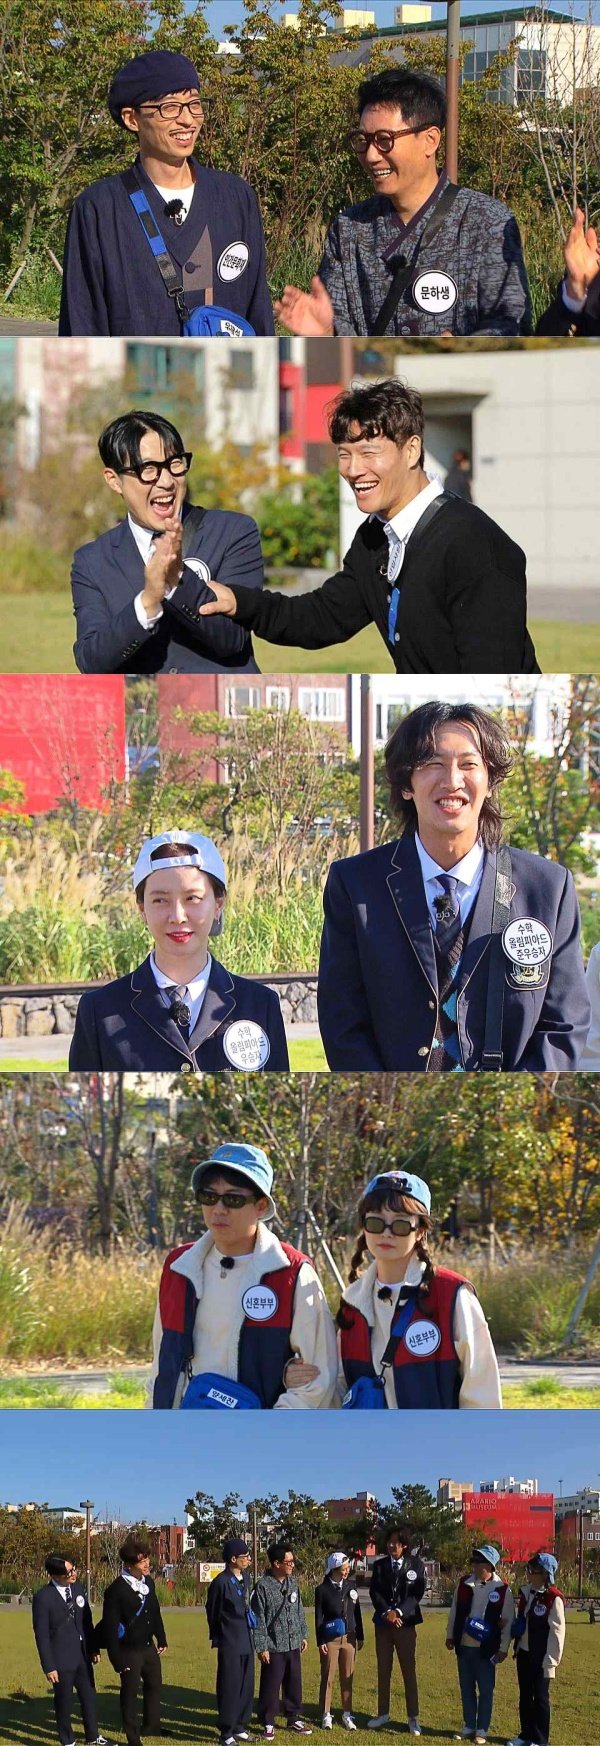 Earlier, Running Man made a big headline, setting a character that broke the mold through the Chuseok special feature Yoos Heritage War which was broadcast in October and climbing to the top of video streaming sites and major portal clip views immediately after the broadcast with the Chemi Explosion situation drama.This weeks broadcast predicted the birth of another legend situation drama with the concept of A variety of 4 couples leaving the package Travel to Jeju Island.On this day, the priest Chemie of Yoo Jae-Suk, a human cultural asset that can not be identified, and Ji Suk-jin, a priest of Gubakdegi, Kim Jong-kook, and Haha, a deputy to Super Rookie, and Yang Se-chan, Jeon So-min, Song Ji-hyo, the winner of the Mathematics Olympiad, and Lee Kwang-soo, the runner-up, caught the attention of the character and the chemistry with the pair.They enjoyed a great trip to the scenery and sightseeing spots of Jeju Island, touring restaurants, taking pictures of life, but there was a tension in the pleasant Travel when the super-class reversal hidden in the package Travel was revealed.Also, the first special feature of Jeju Island, which was broadcast last week, produced a lot of topics as Lee Joo-bin and Han Ji-eun, who were invited as guests, were on the portal site search terms. This week, which was also featured as Jeju Islands second special feature, also raised expectations by introducing the beautiful scenery, attractions and food of Jeju Island along with the previous-class situation drama.The identity of the previous-class situation drama and the reverse package Travel, which show the 10-year breathing among the members, can be seen on Running Man, which is broadcasted at 5 pm on Sunday, 8th.